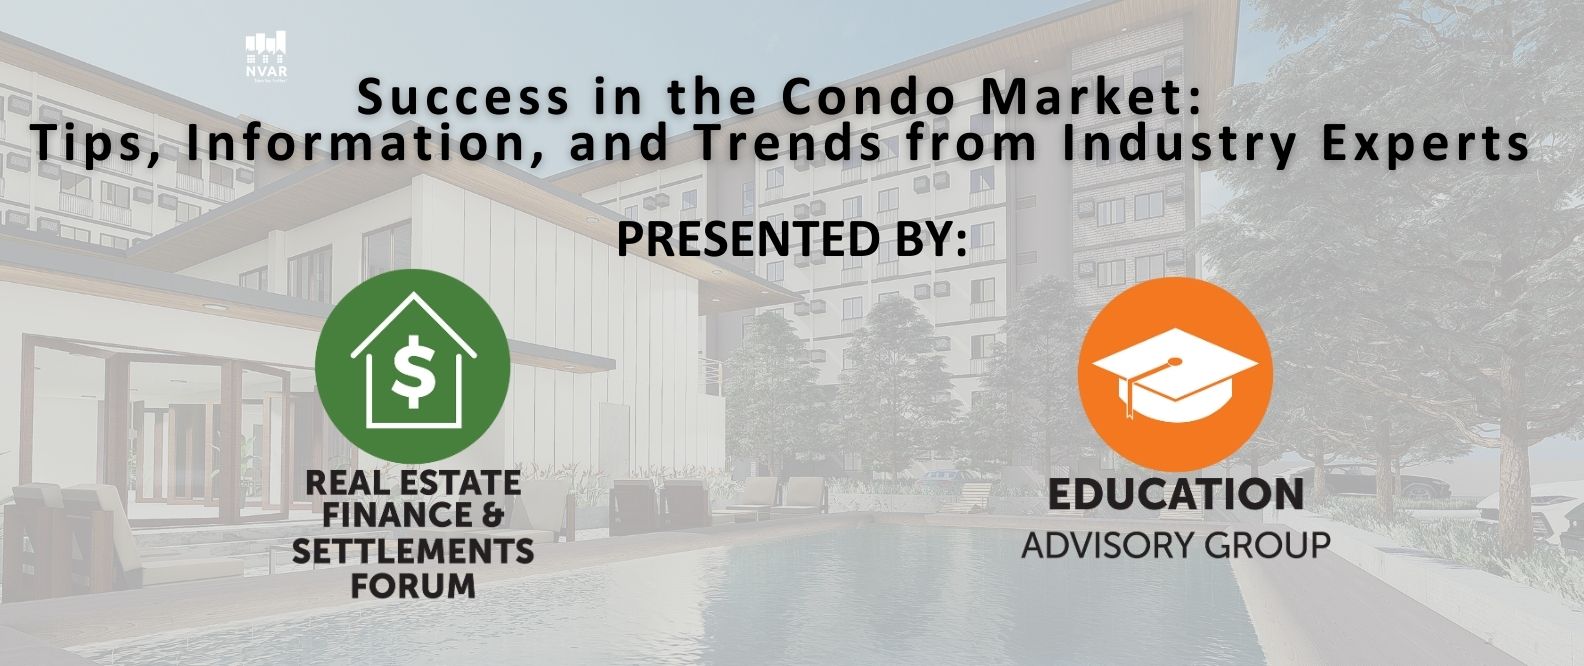 Success in the Condo Market Tips, Information, and Trends from Industry Experts (1)